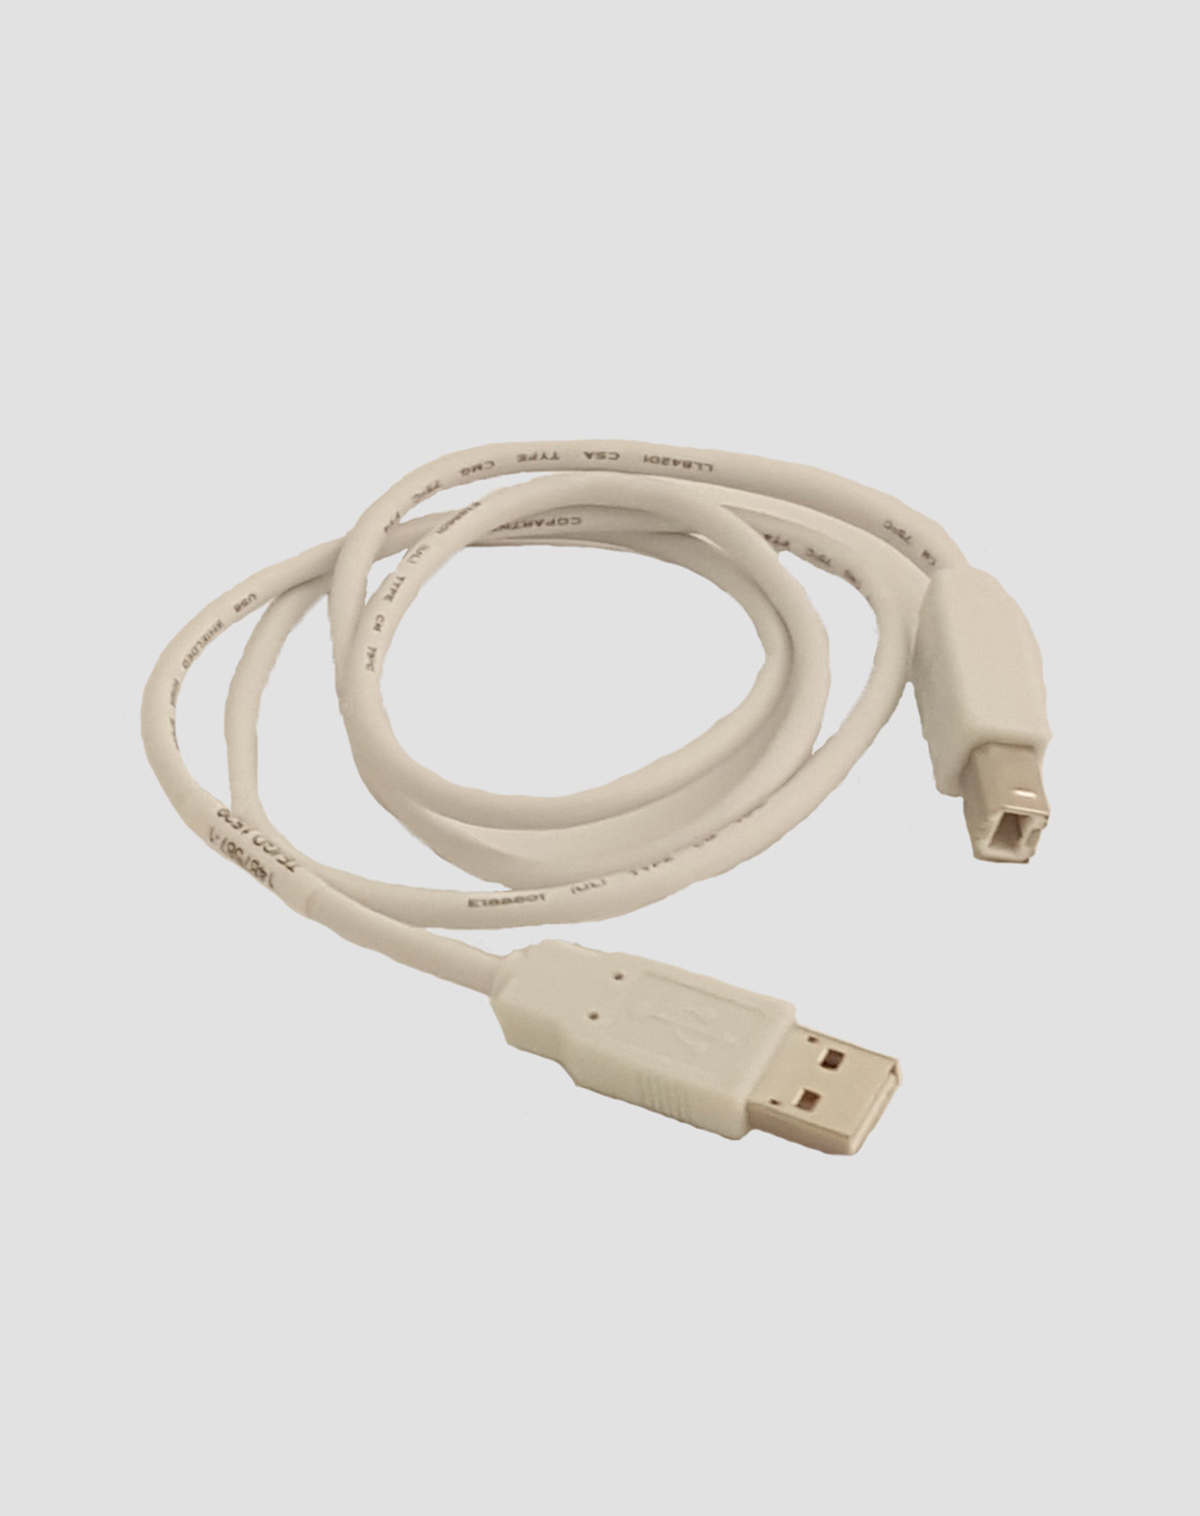 AT34™ USB-Cable